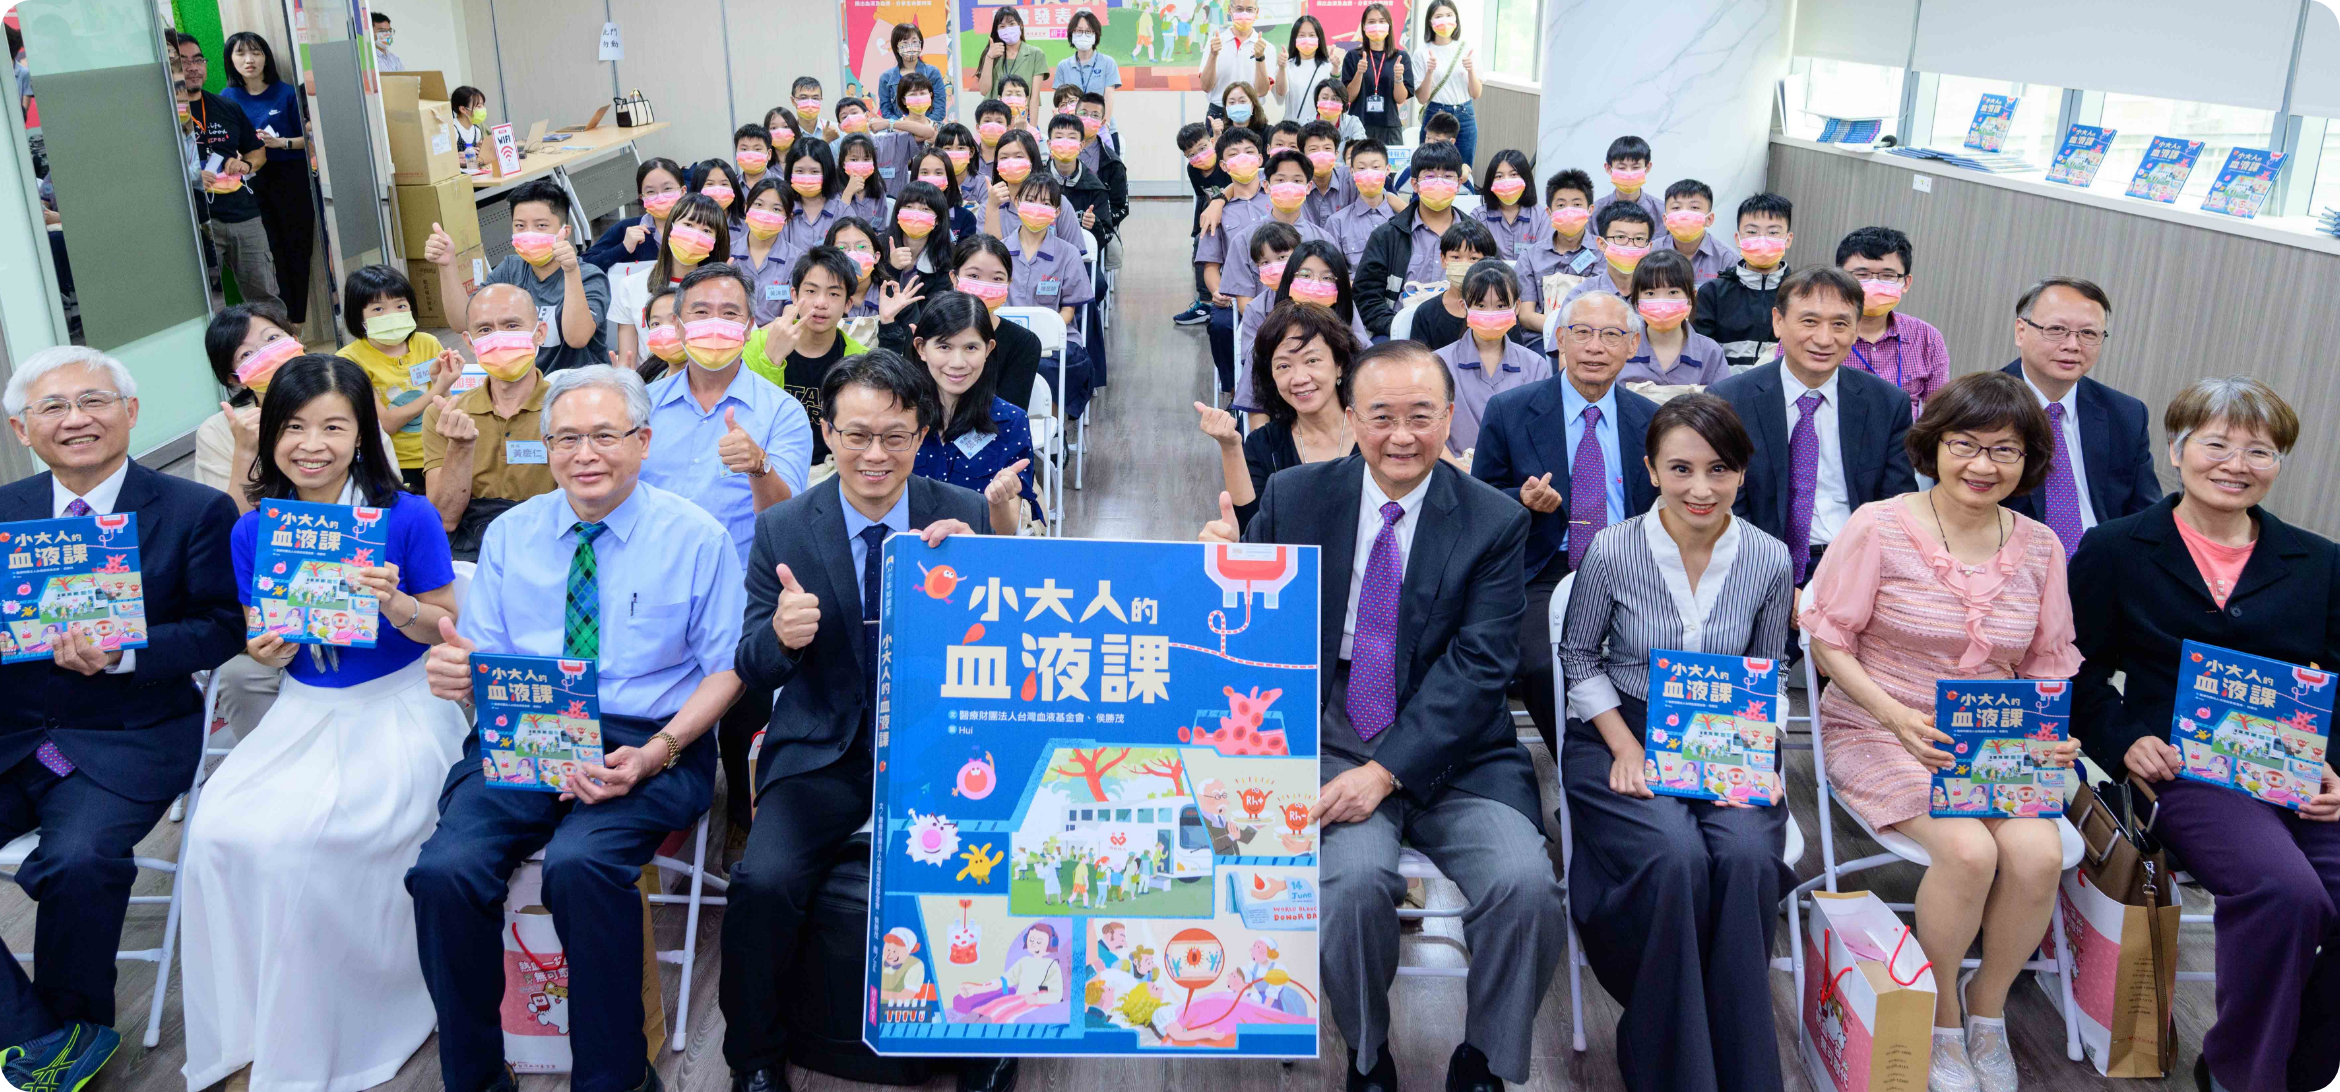 The publication of the new book "Little Adult’s Blood Lesson" and the press conference for World Blood Donor Day concluded with a group photo of guests and nearly 60 teachers, students, and parents, hoping that the vision of blood donation taking root will gradually be realized. 

